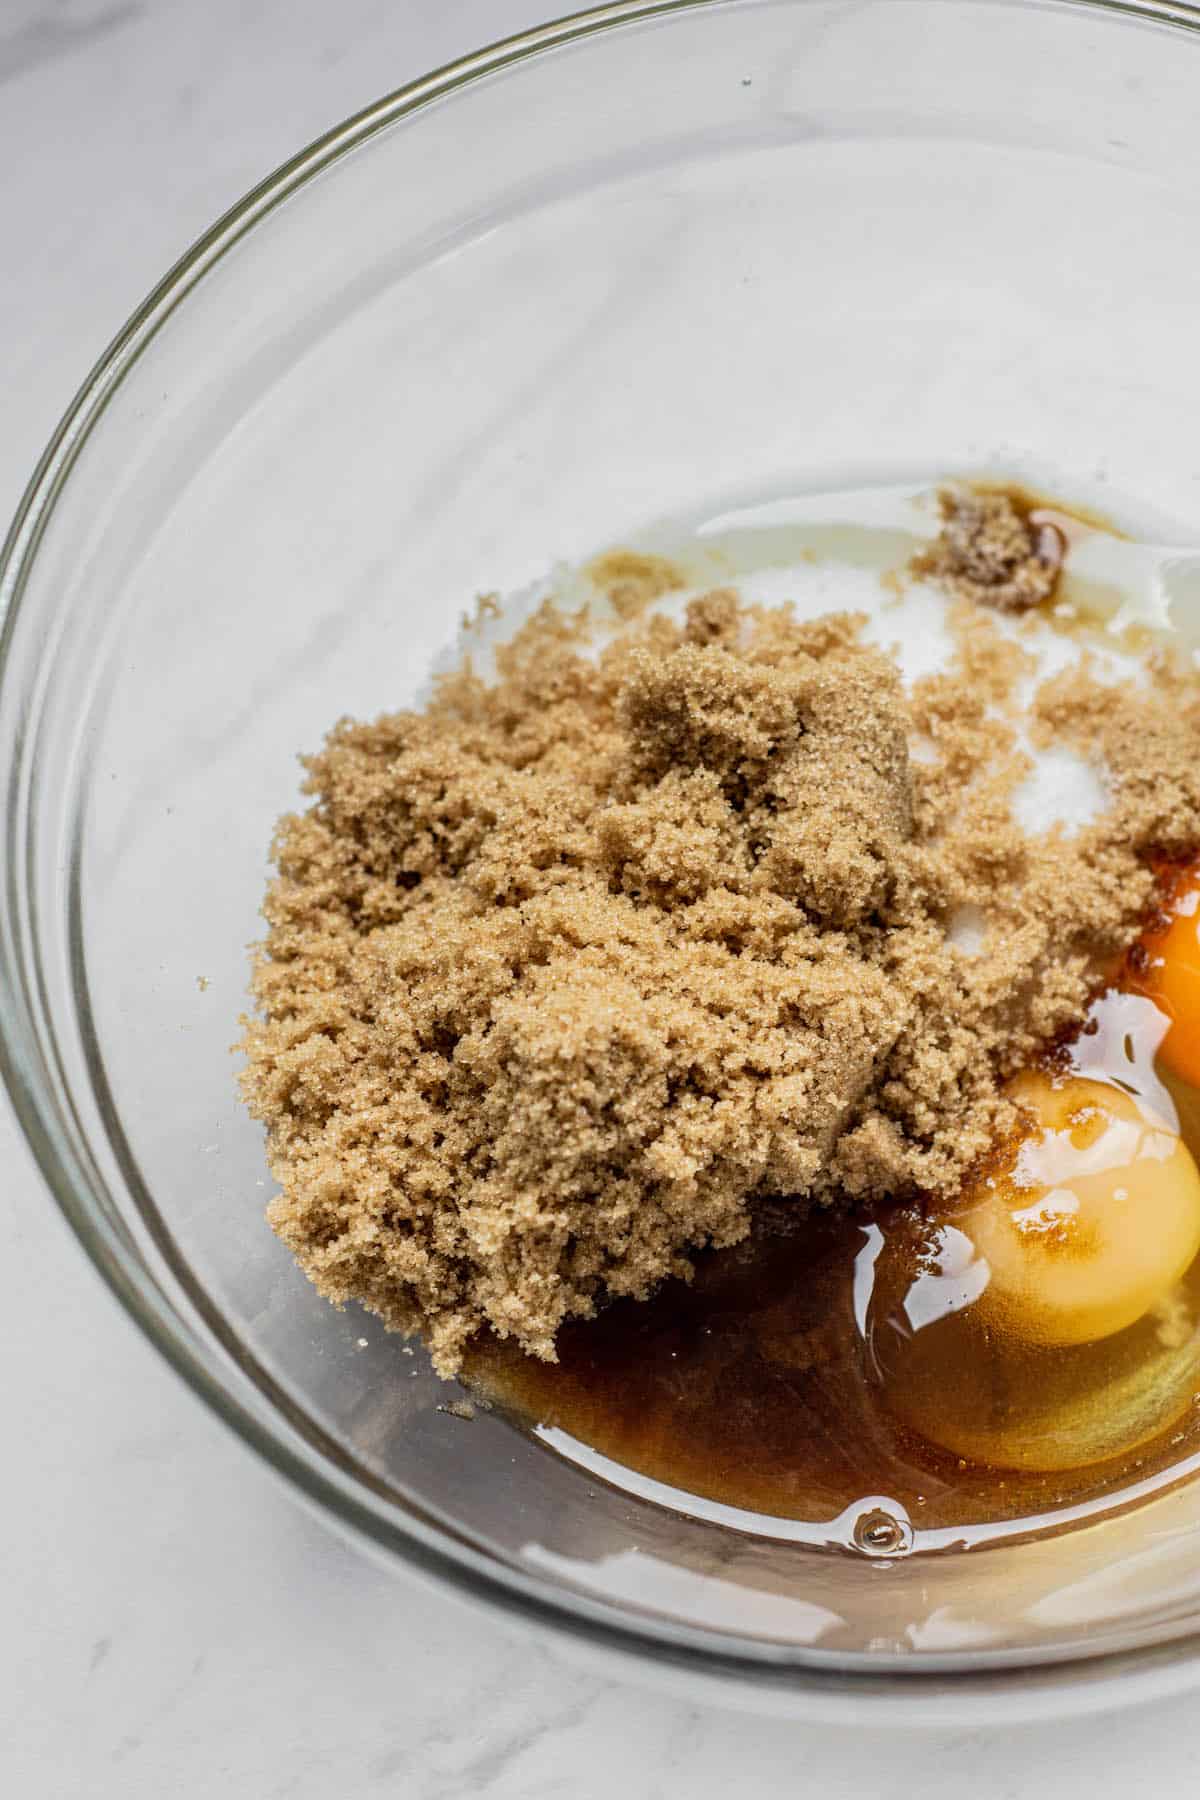 eggs, brown sugar and oil in a bowl.